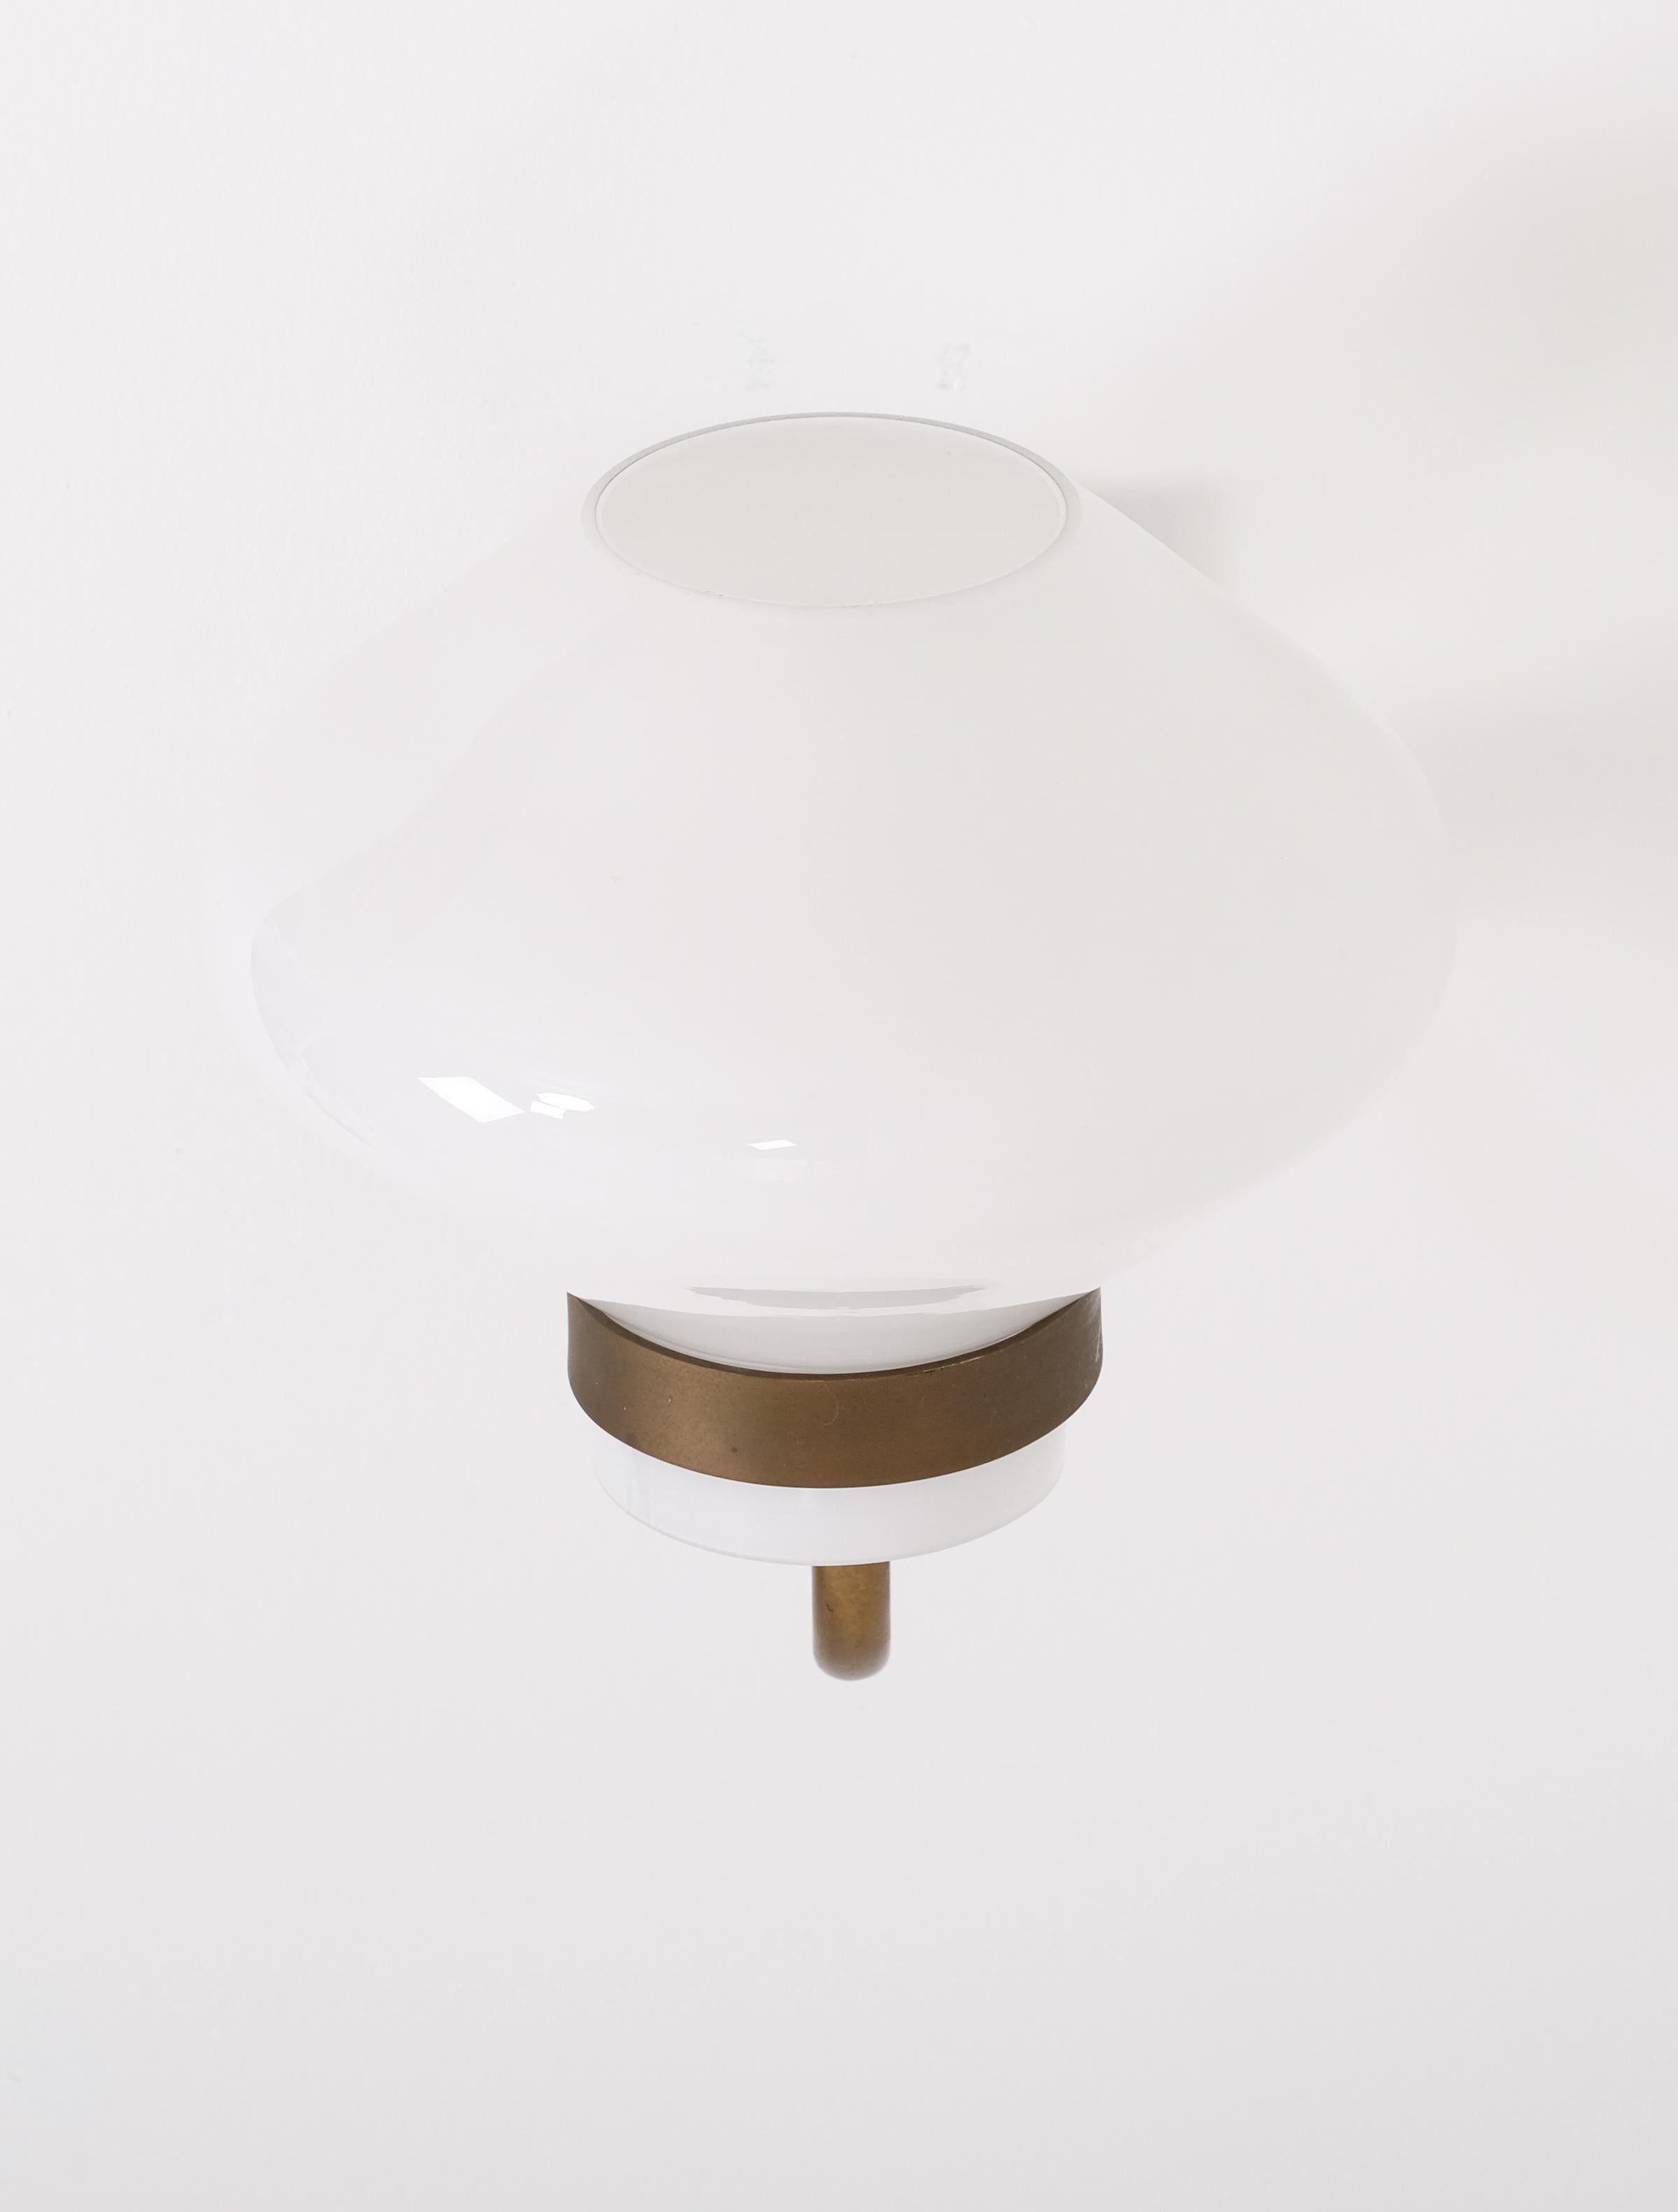 Mid-20th Century Rare set of 8 Wall Lamps by Gunnar Asplund, Sweden, 1940s For Sale